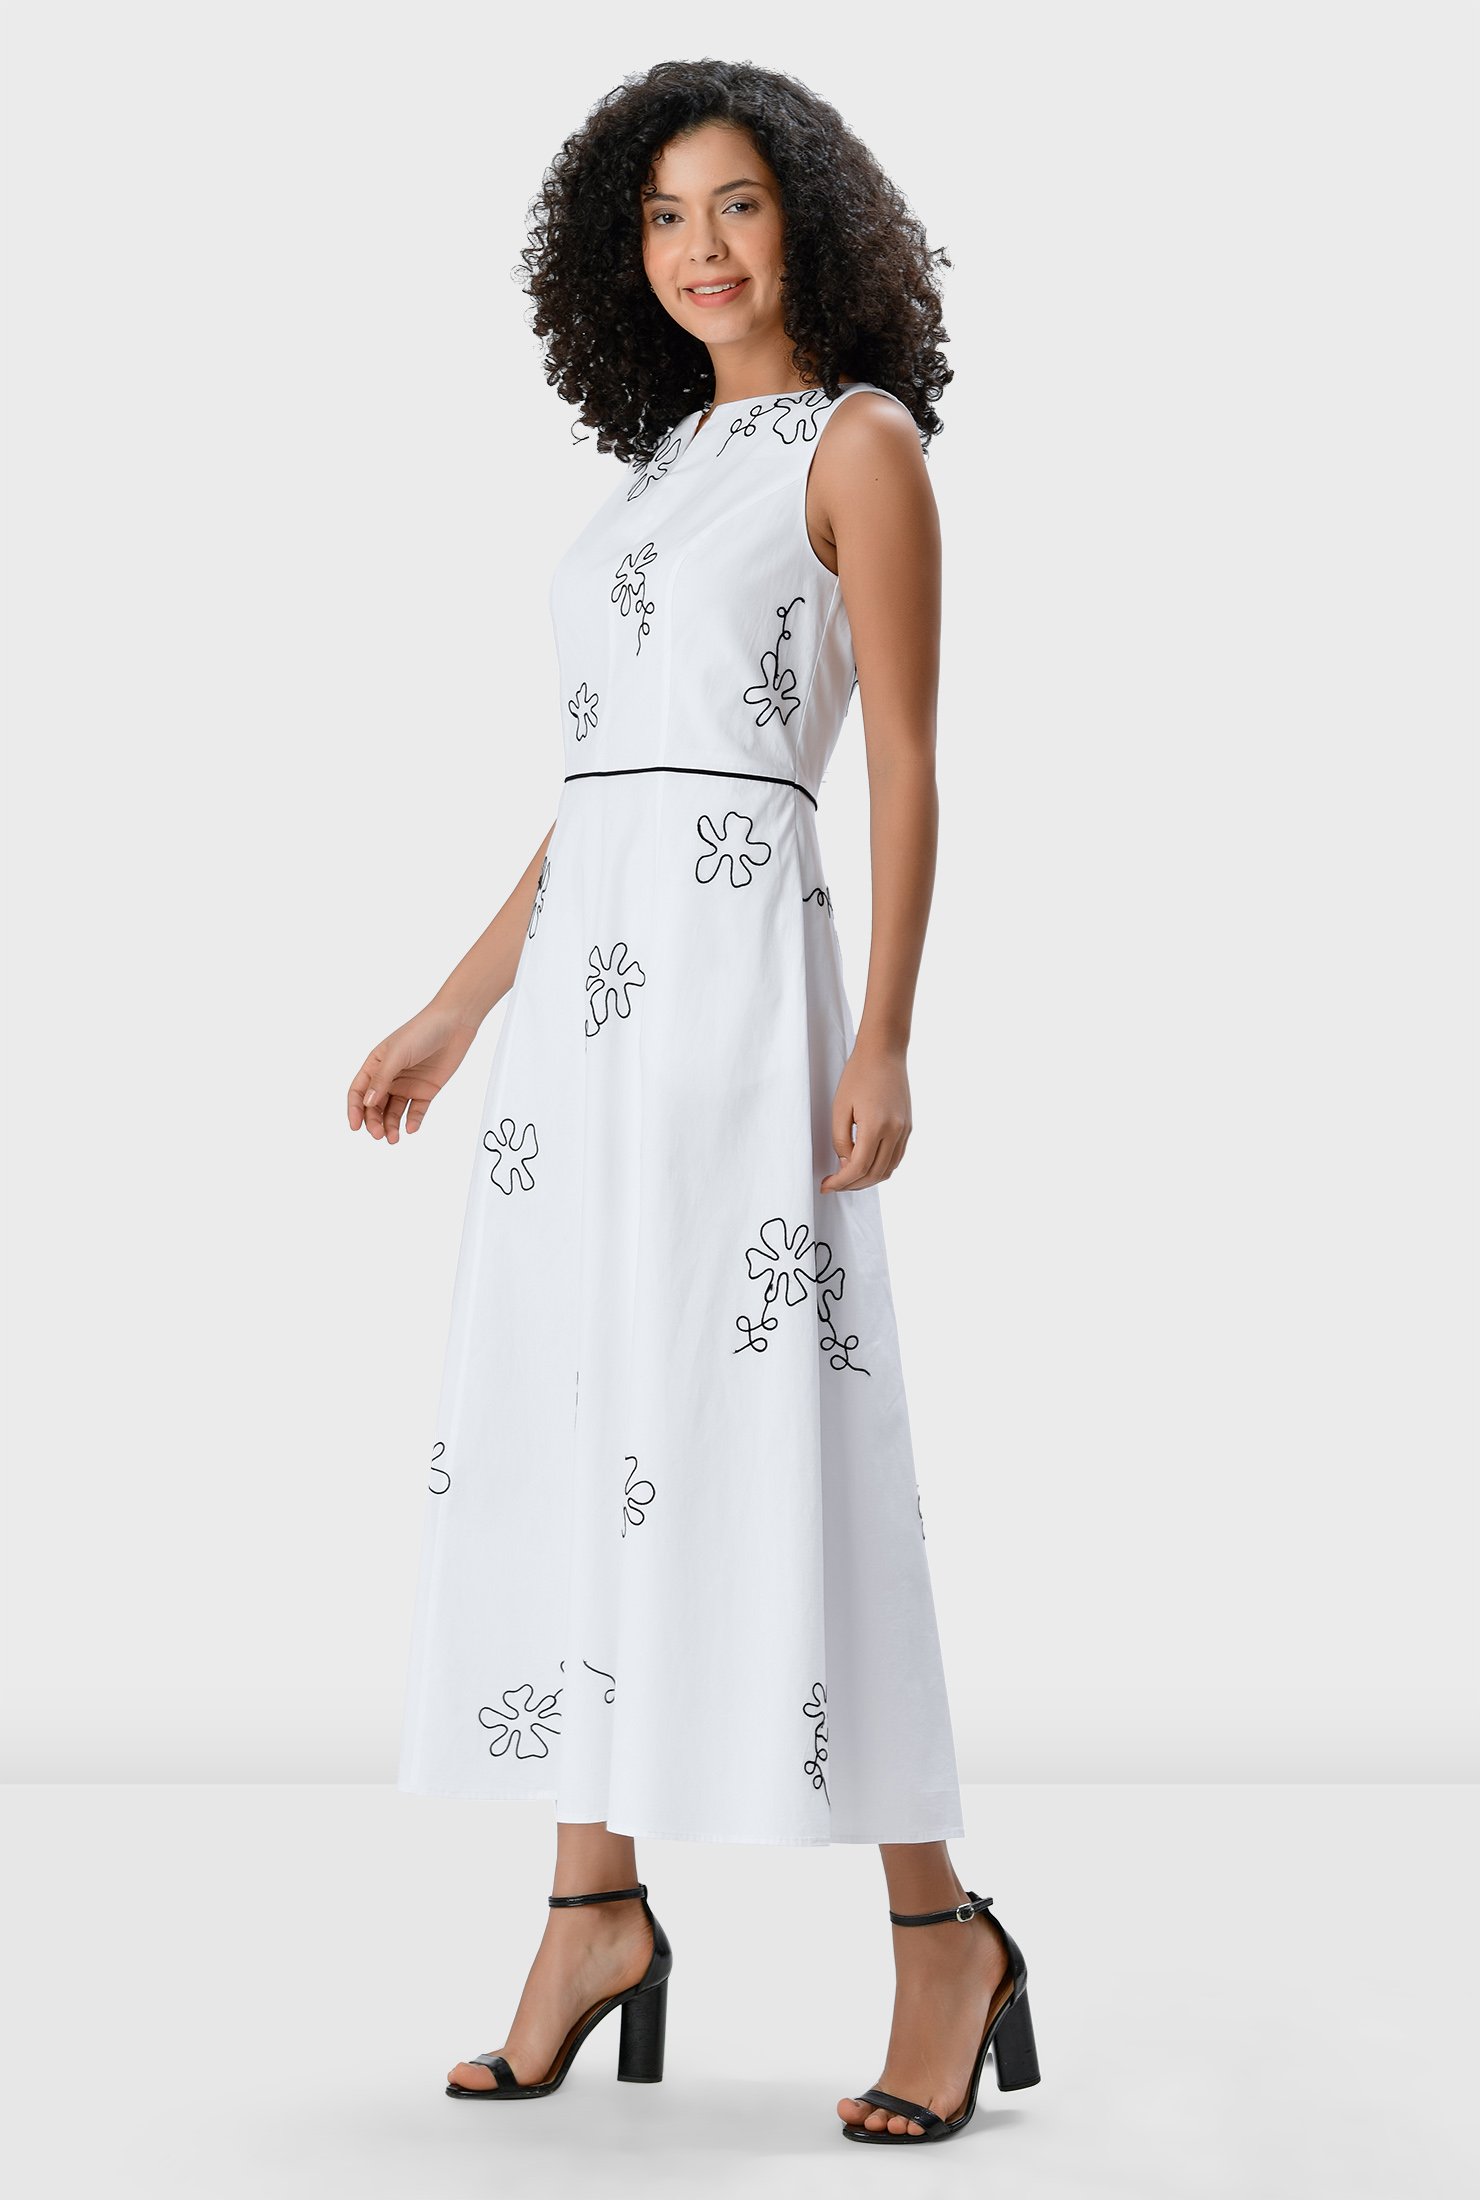 Graphic floral embroidery amps up the seventies charm of our cotton poplin dress, cut in a flattering A-line silhouette and cinched in at the contrast seamed waist atop a full flare skirt.